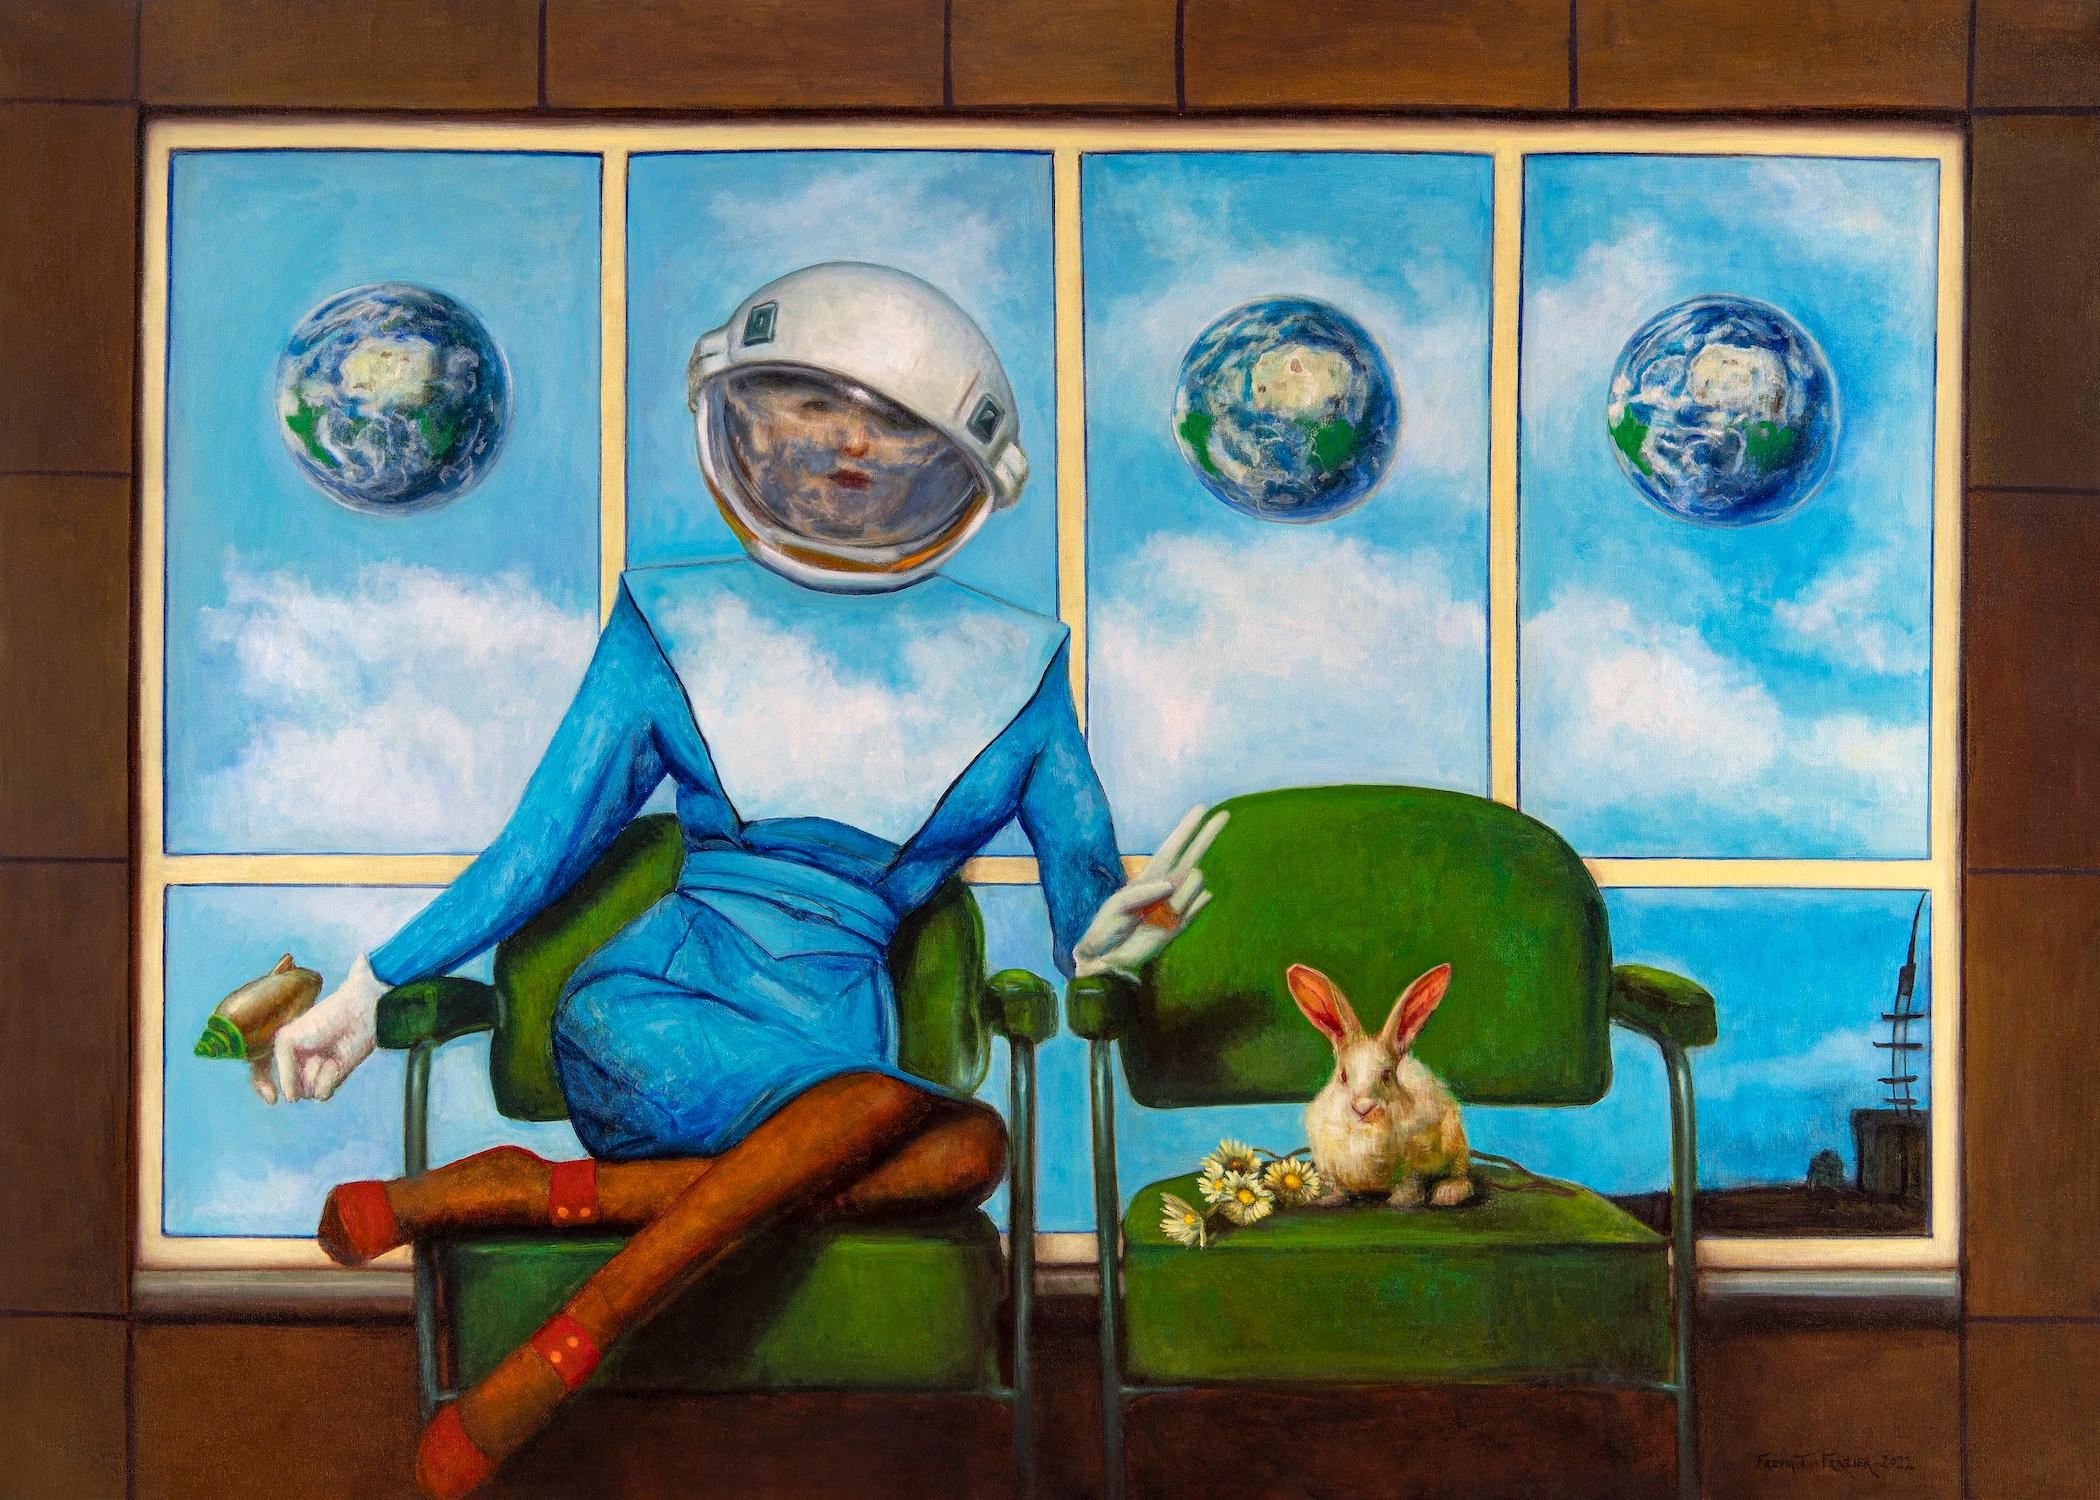 Rose Freymuth-Frazier Figurative Painting - Come In Peace - Futuristic Woman in Space Suit Seated Next to a Bunny